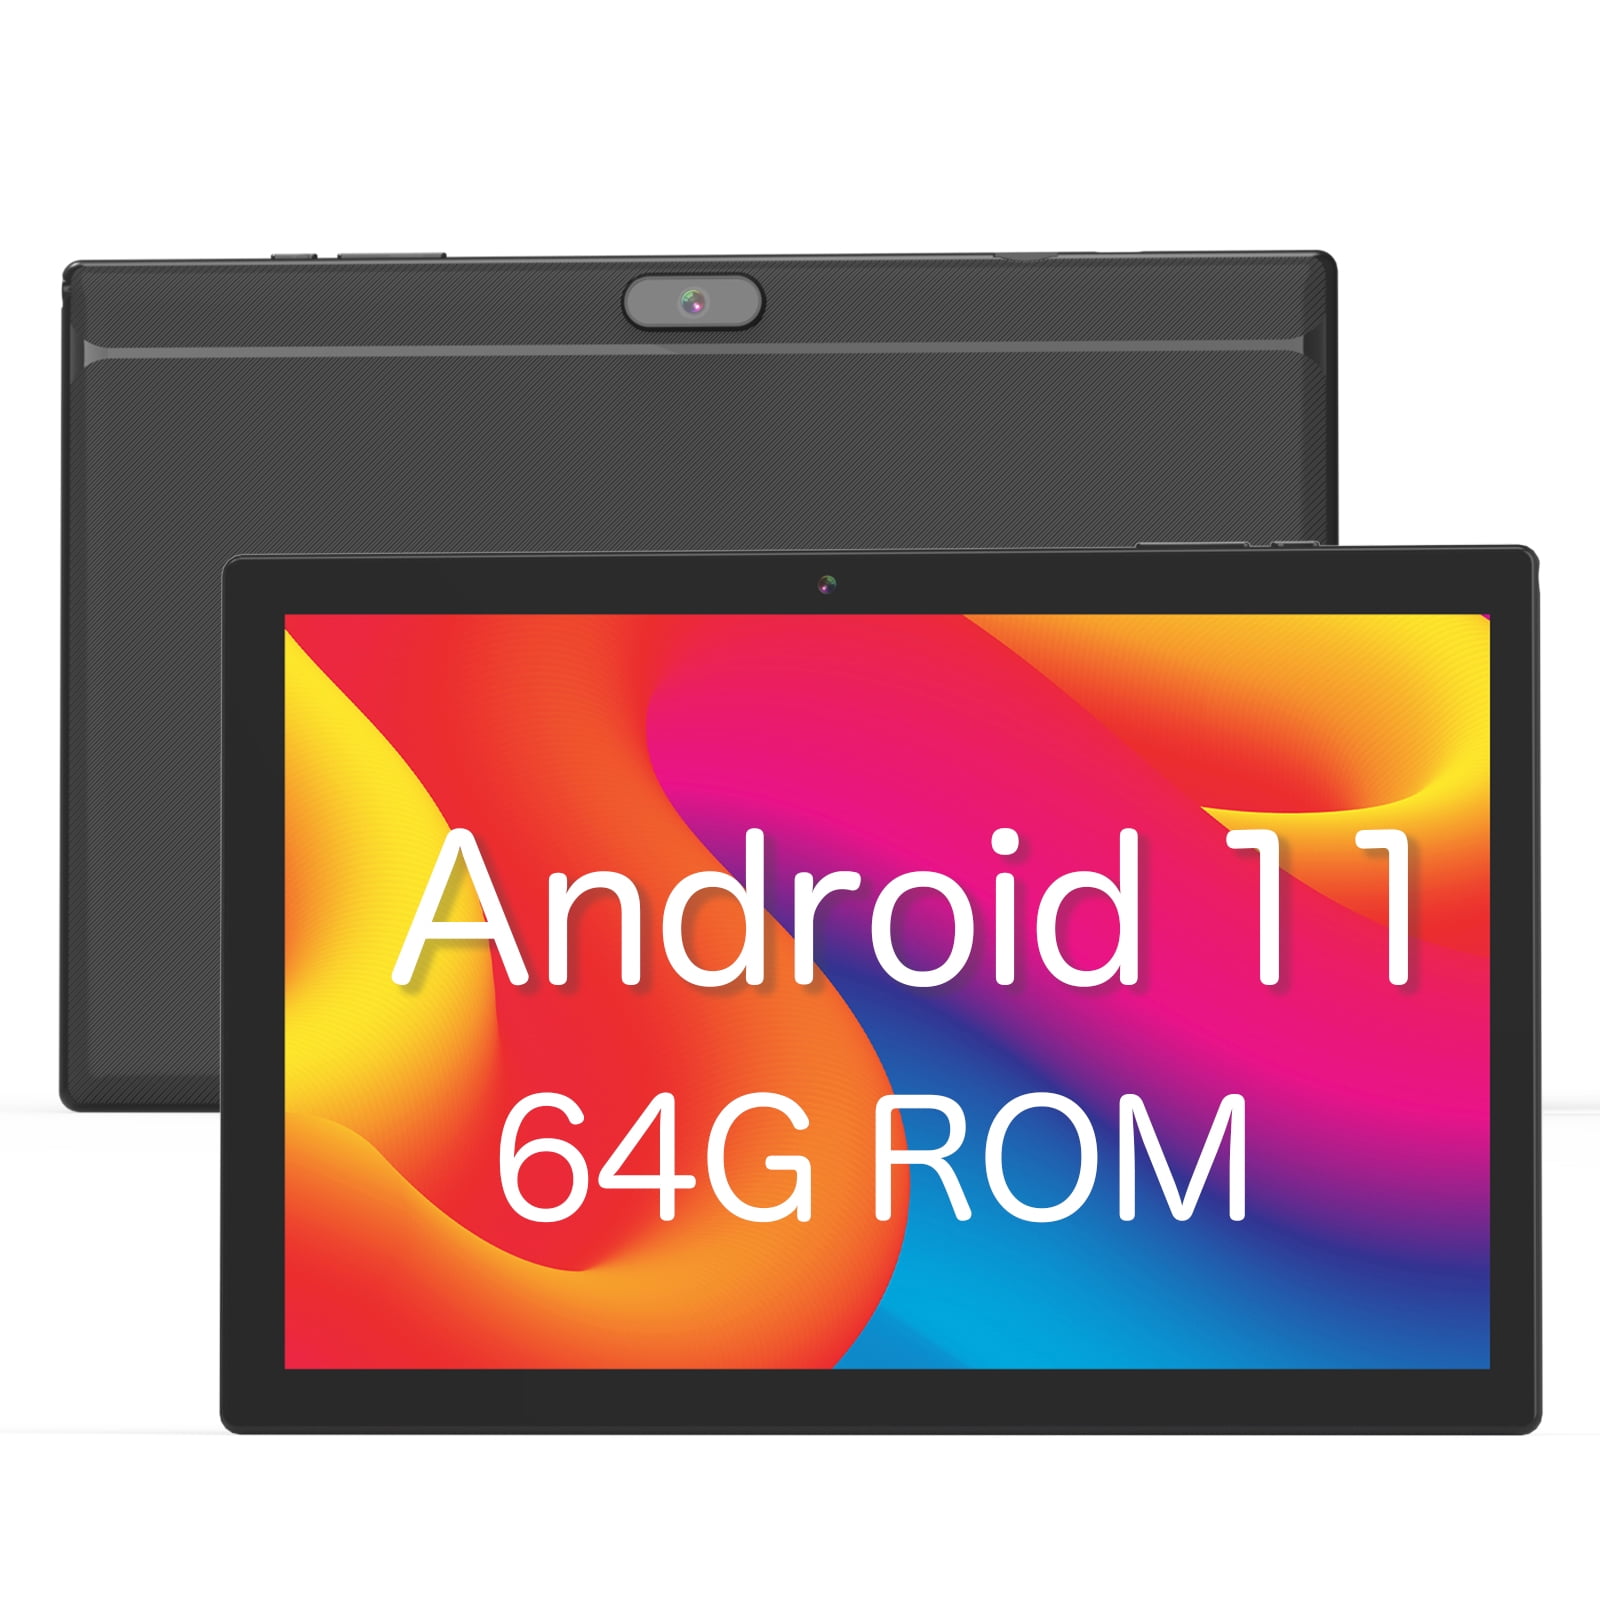 Android 13 Tablet 10 inch Tablets with 8GB RAM 64GB ROM 1TB Expand,  1280x800 IPS Touchscreen, WiFi 6, Dual Camera, 6000mAh Battery, GMS,  Quad-Core